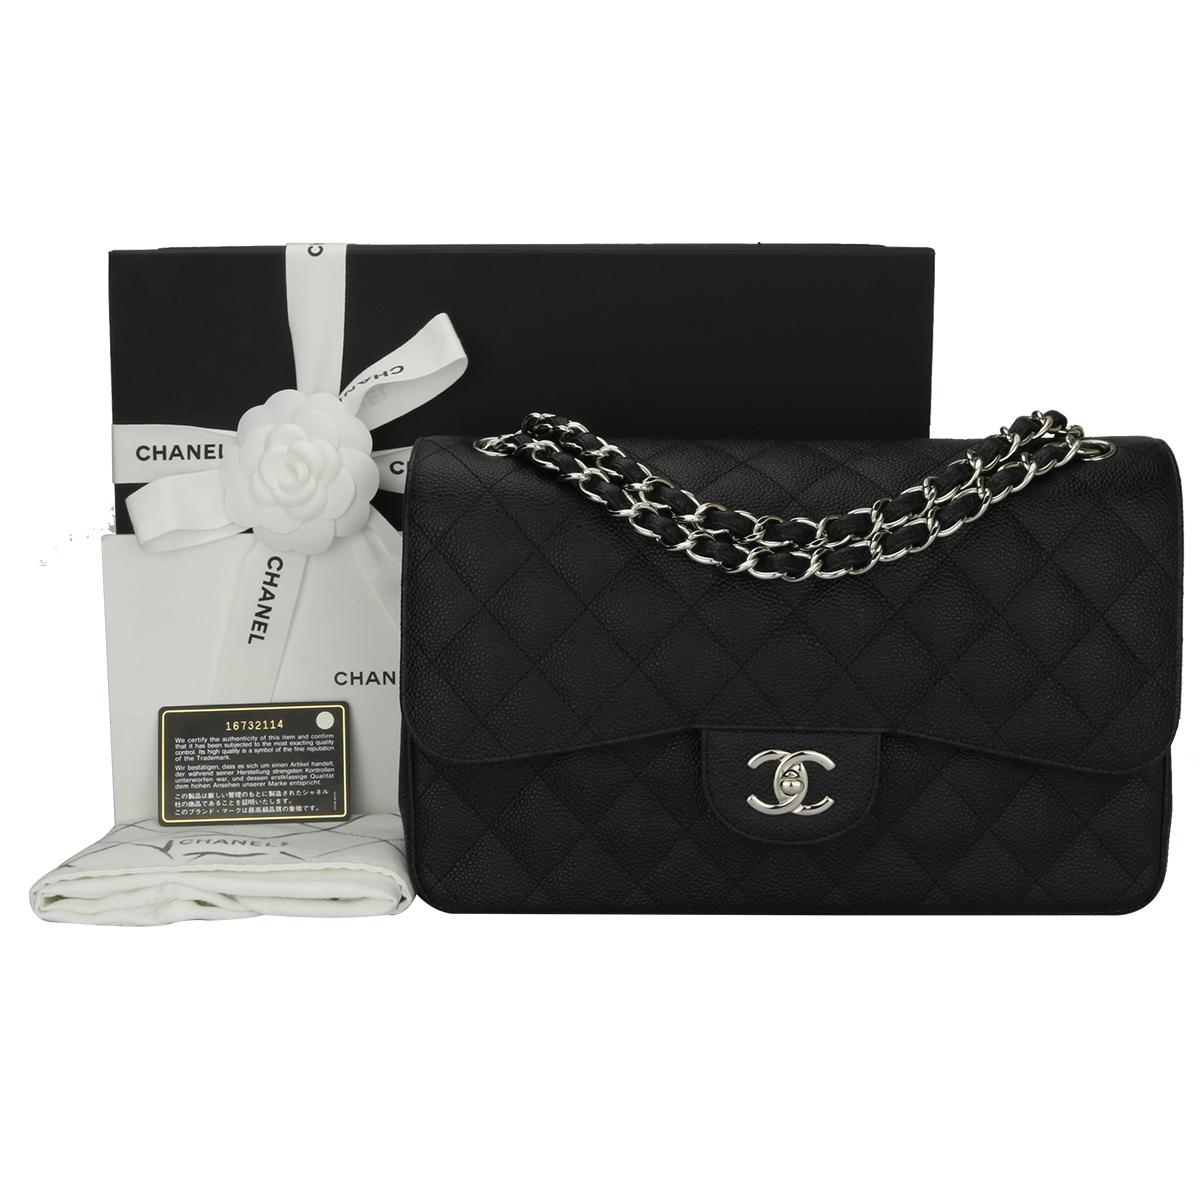 Authentic CHANEL Classic Jumbo Double Flap Black Caviar with Silver Hardware 2012.

This stunning bag is in a mint condition, the bag still holds its original shape, and the hardware is still very shiny.

Exterior Condition: Mint condition, corners